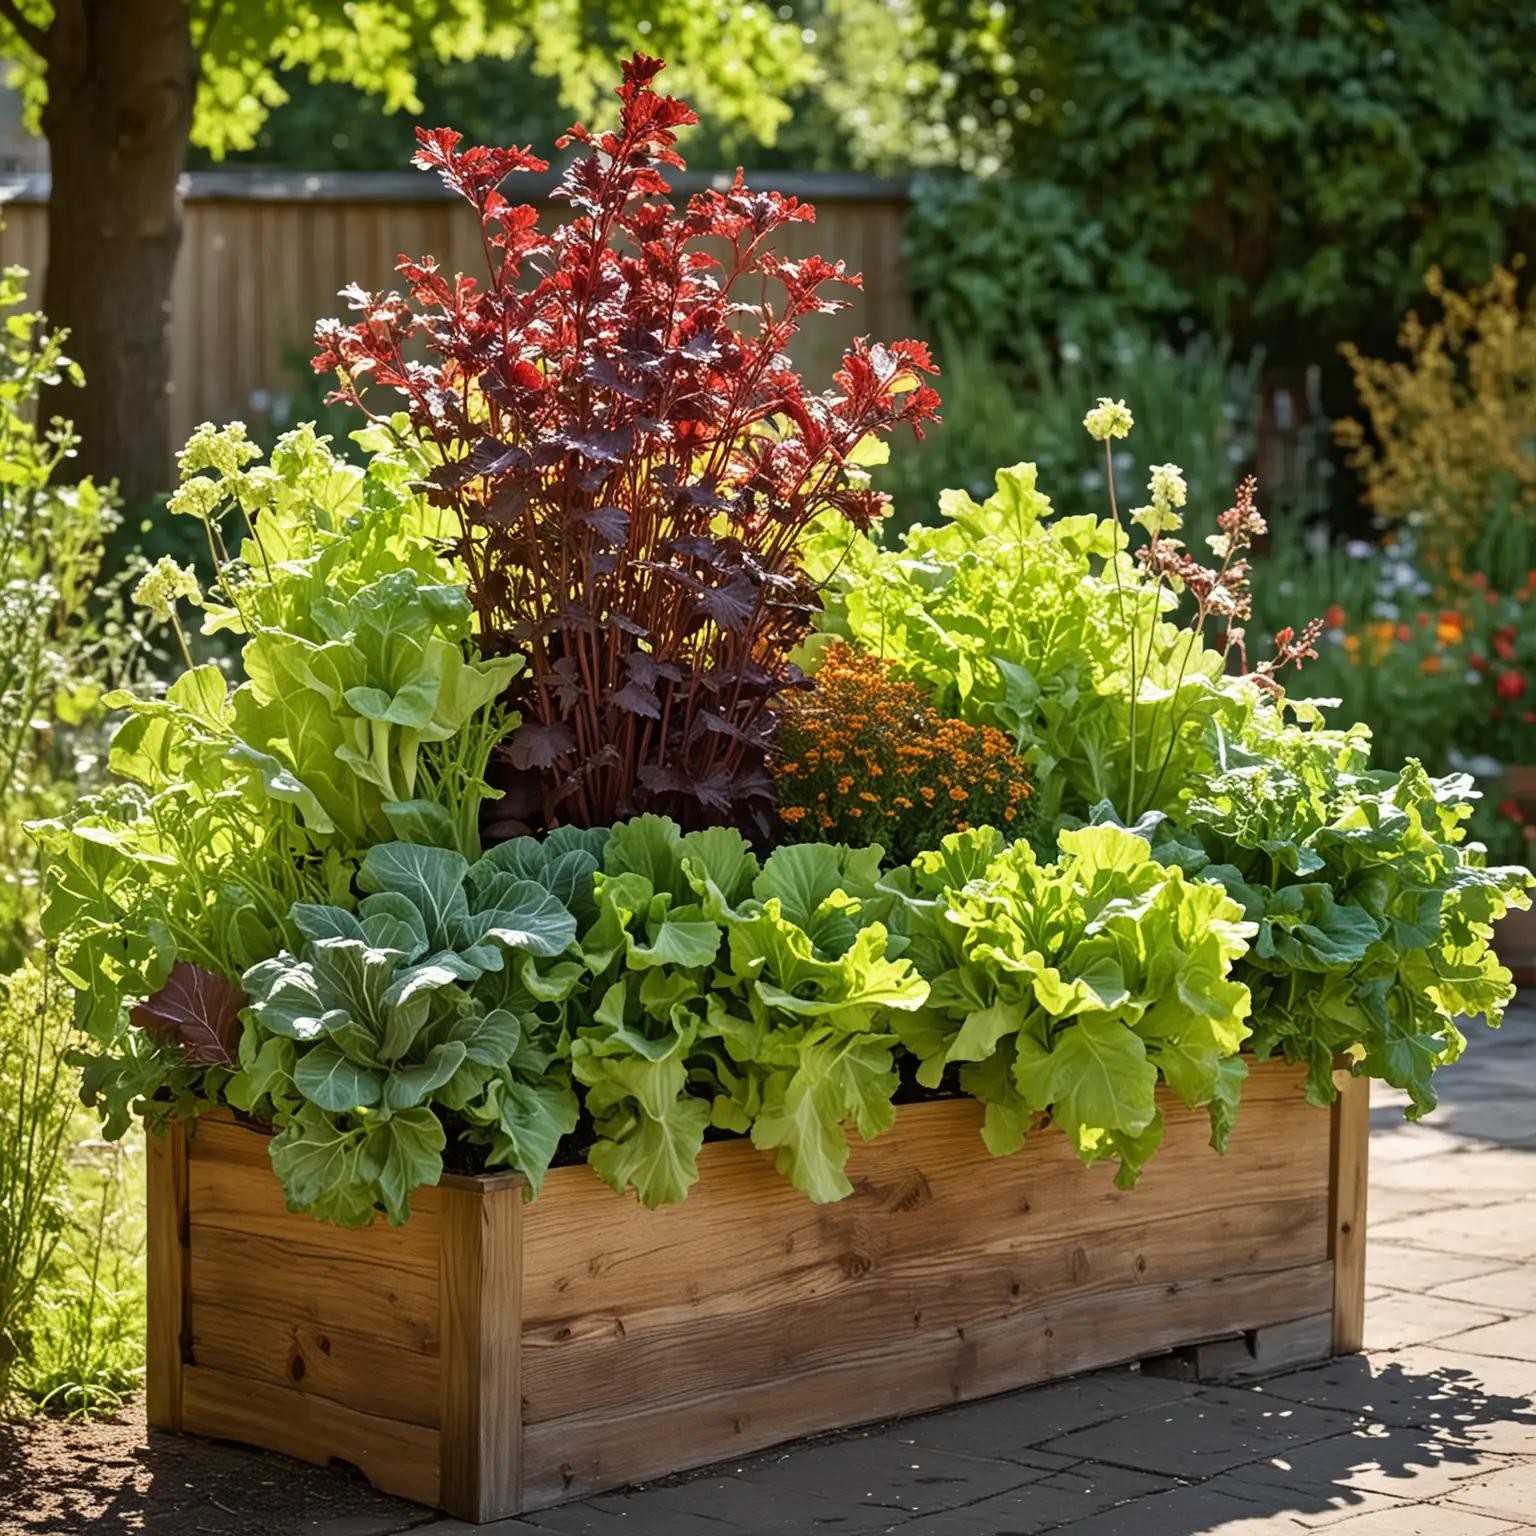 AN OUTSIDE PLANTER WITH VARIOUS LETTUCES IN IT. SUNNY BACKGROUND WITH BLURRED  GARDEN FLOWERS AND TREE